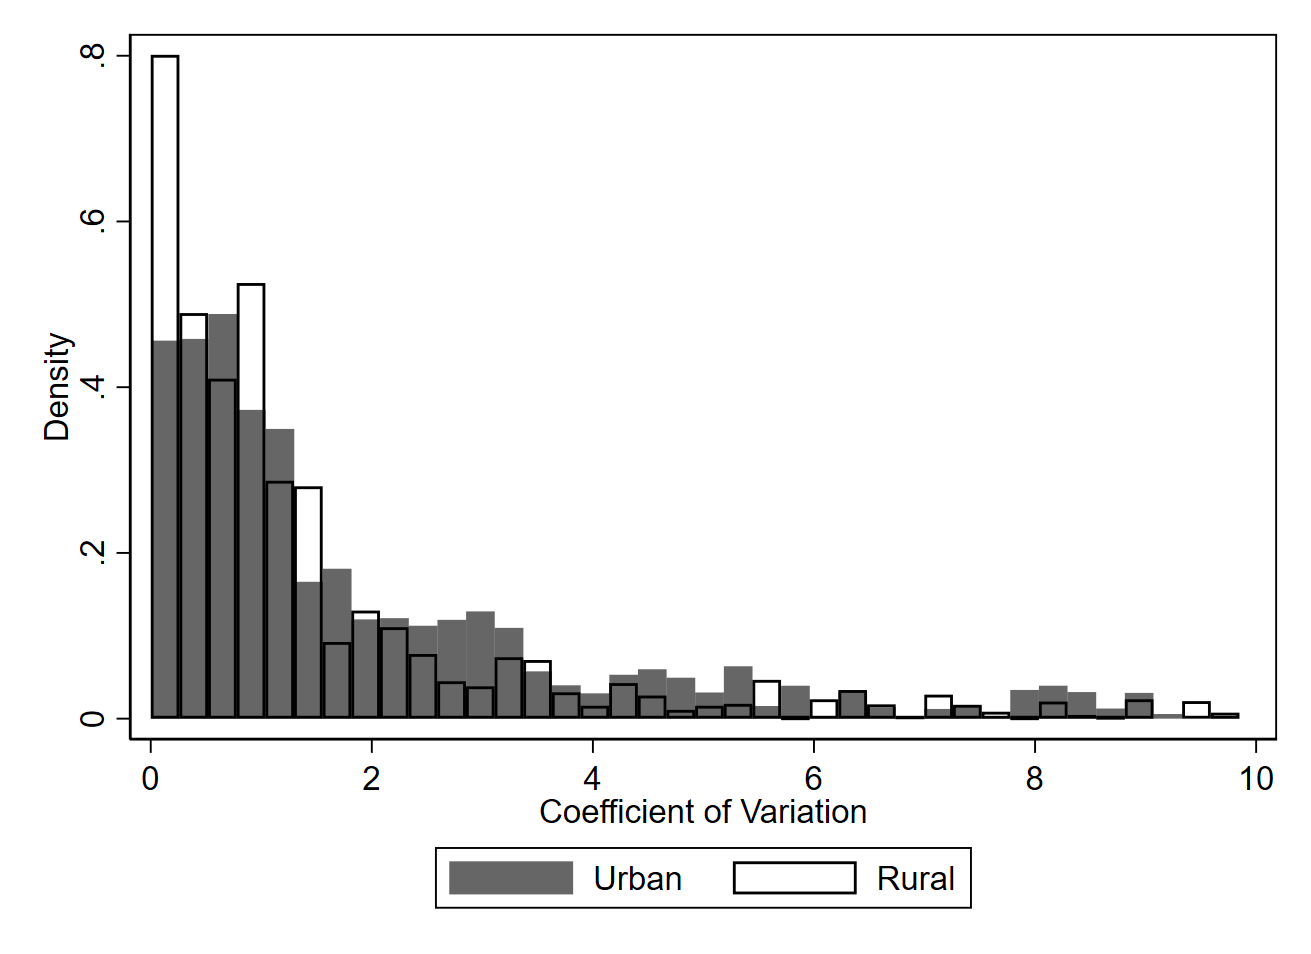 Price Dispersion in Urban and Rural Areas